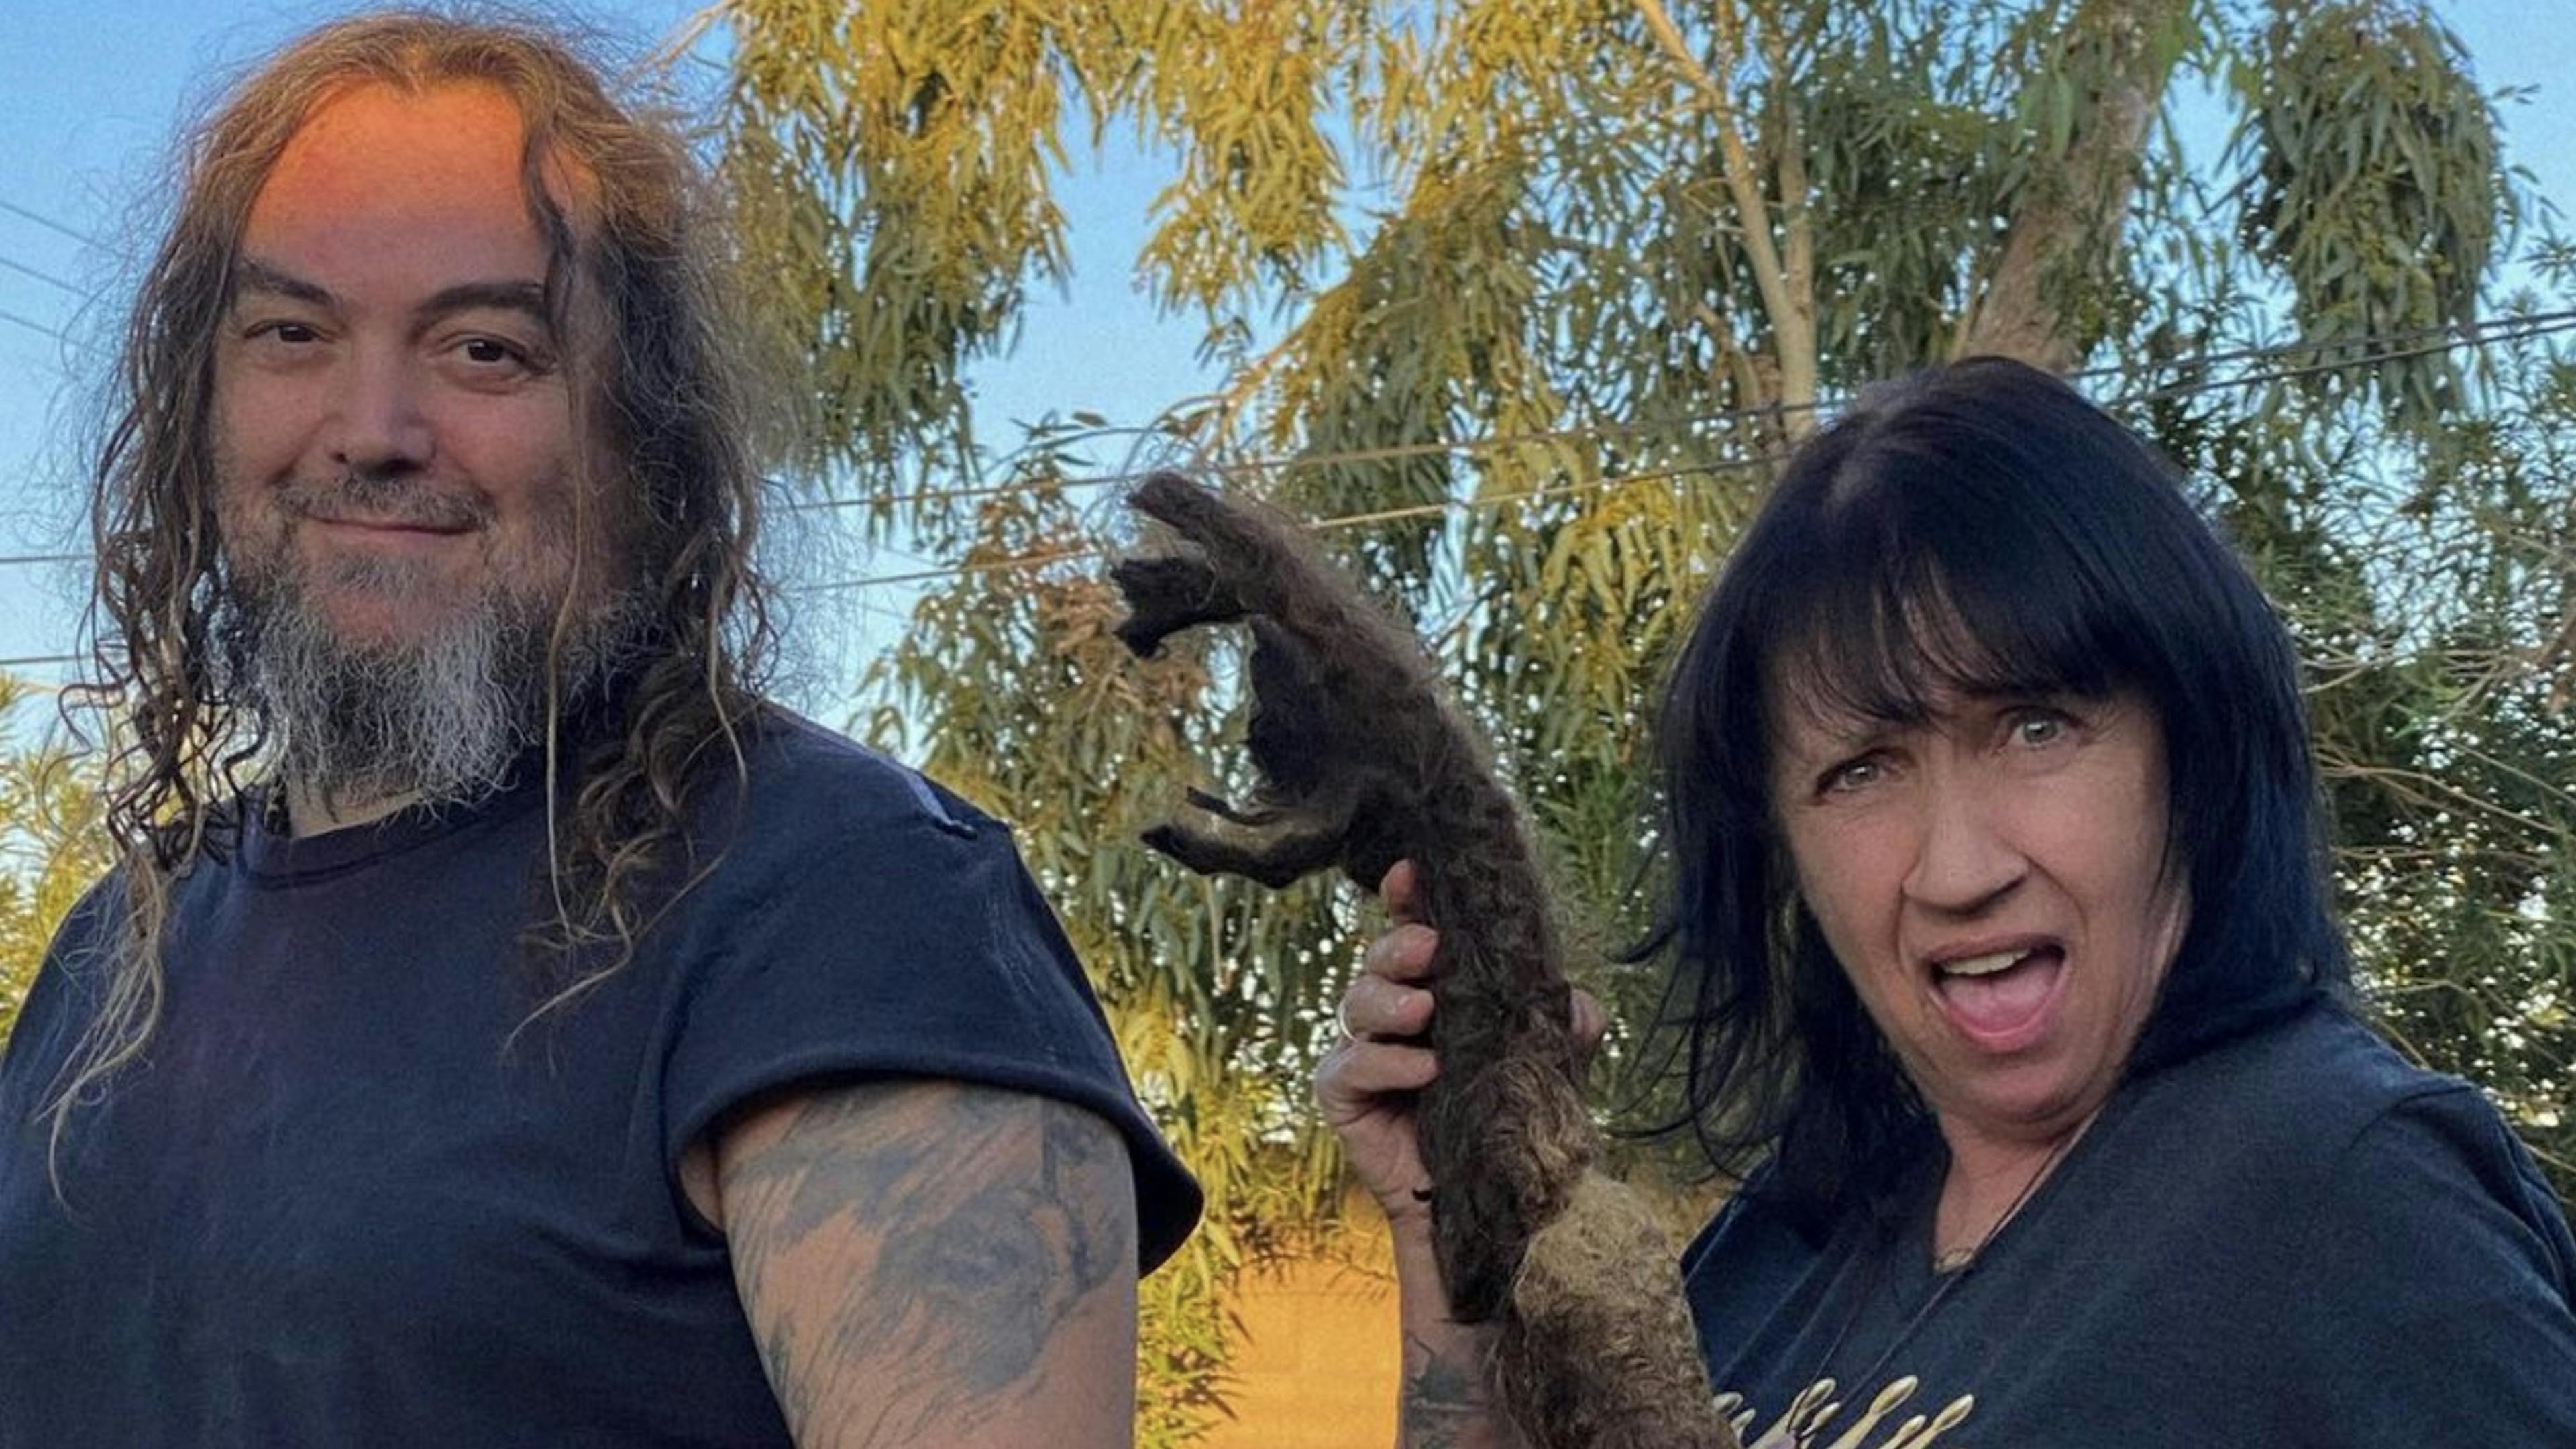 Max Cavalera Cuts Off The Dreadlock He's Grown For 20+ Years